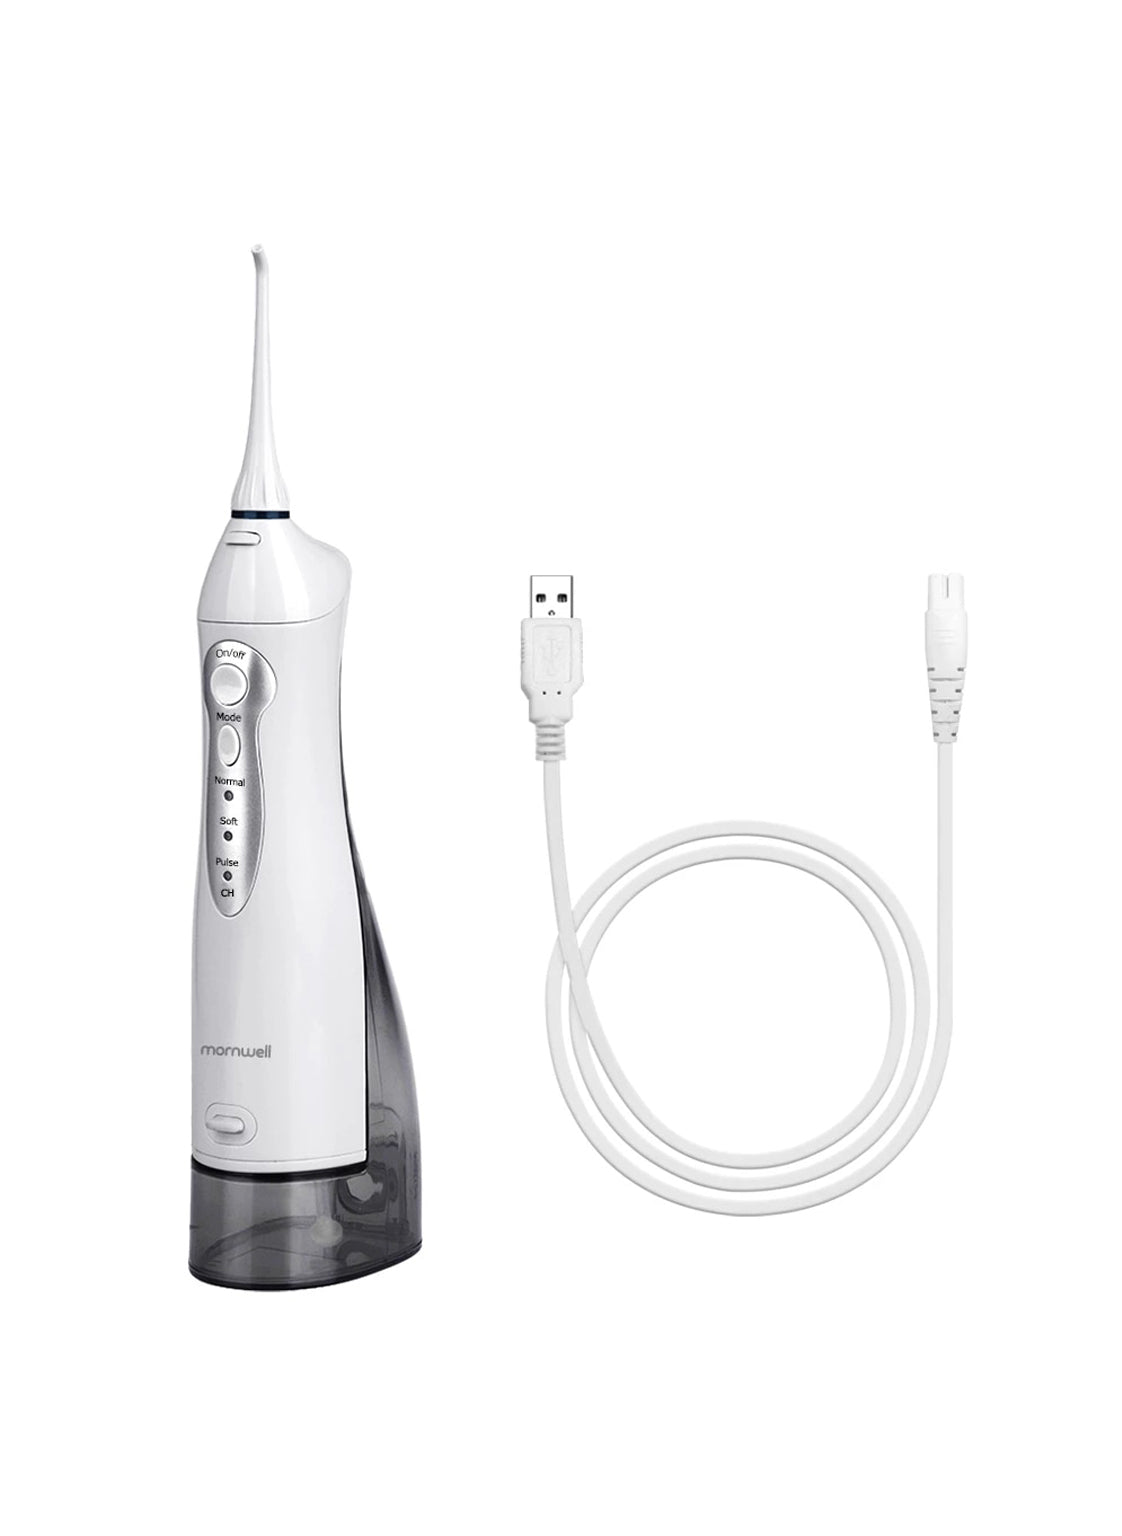 Mornwell Rechargeable Water Flosser with USB Cable